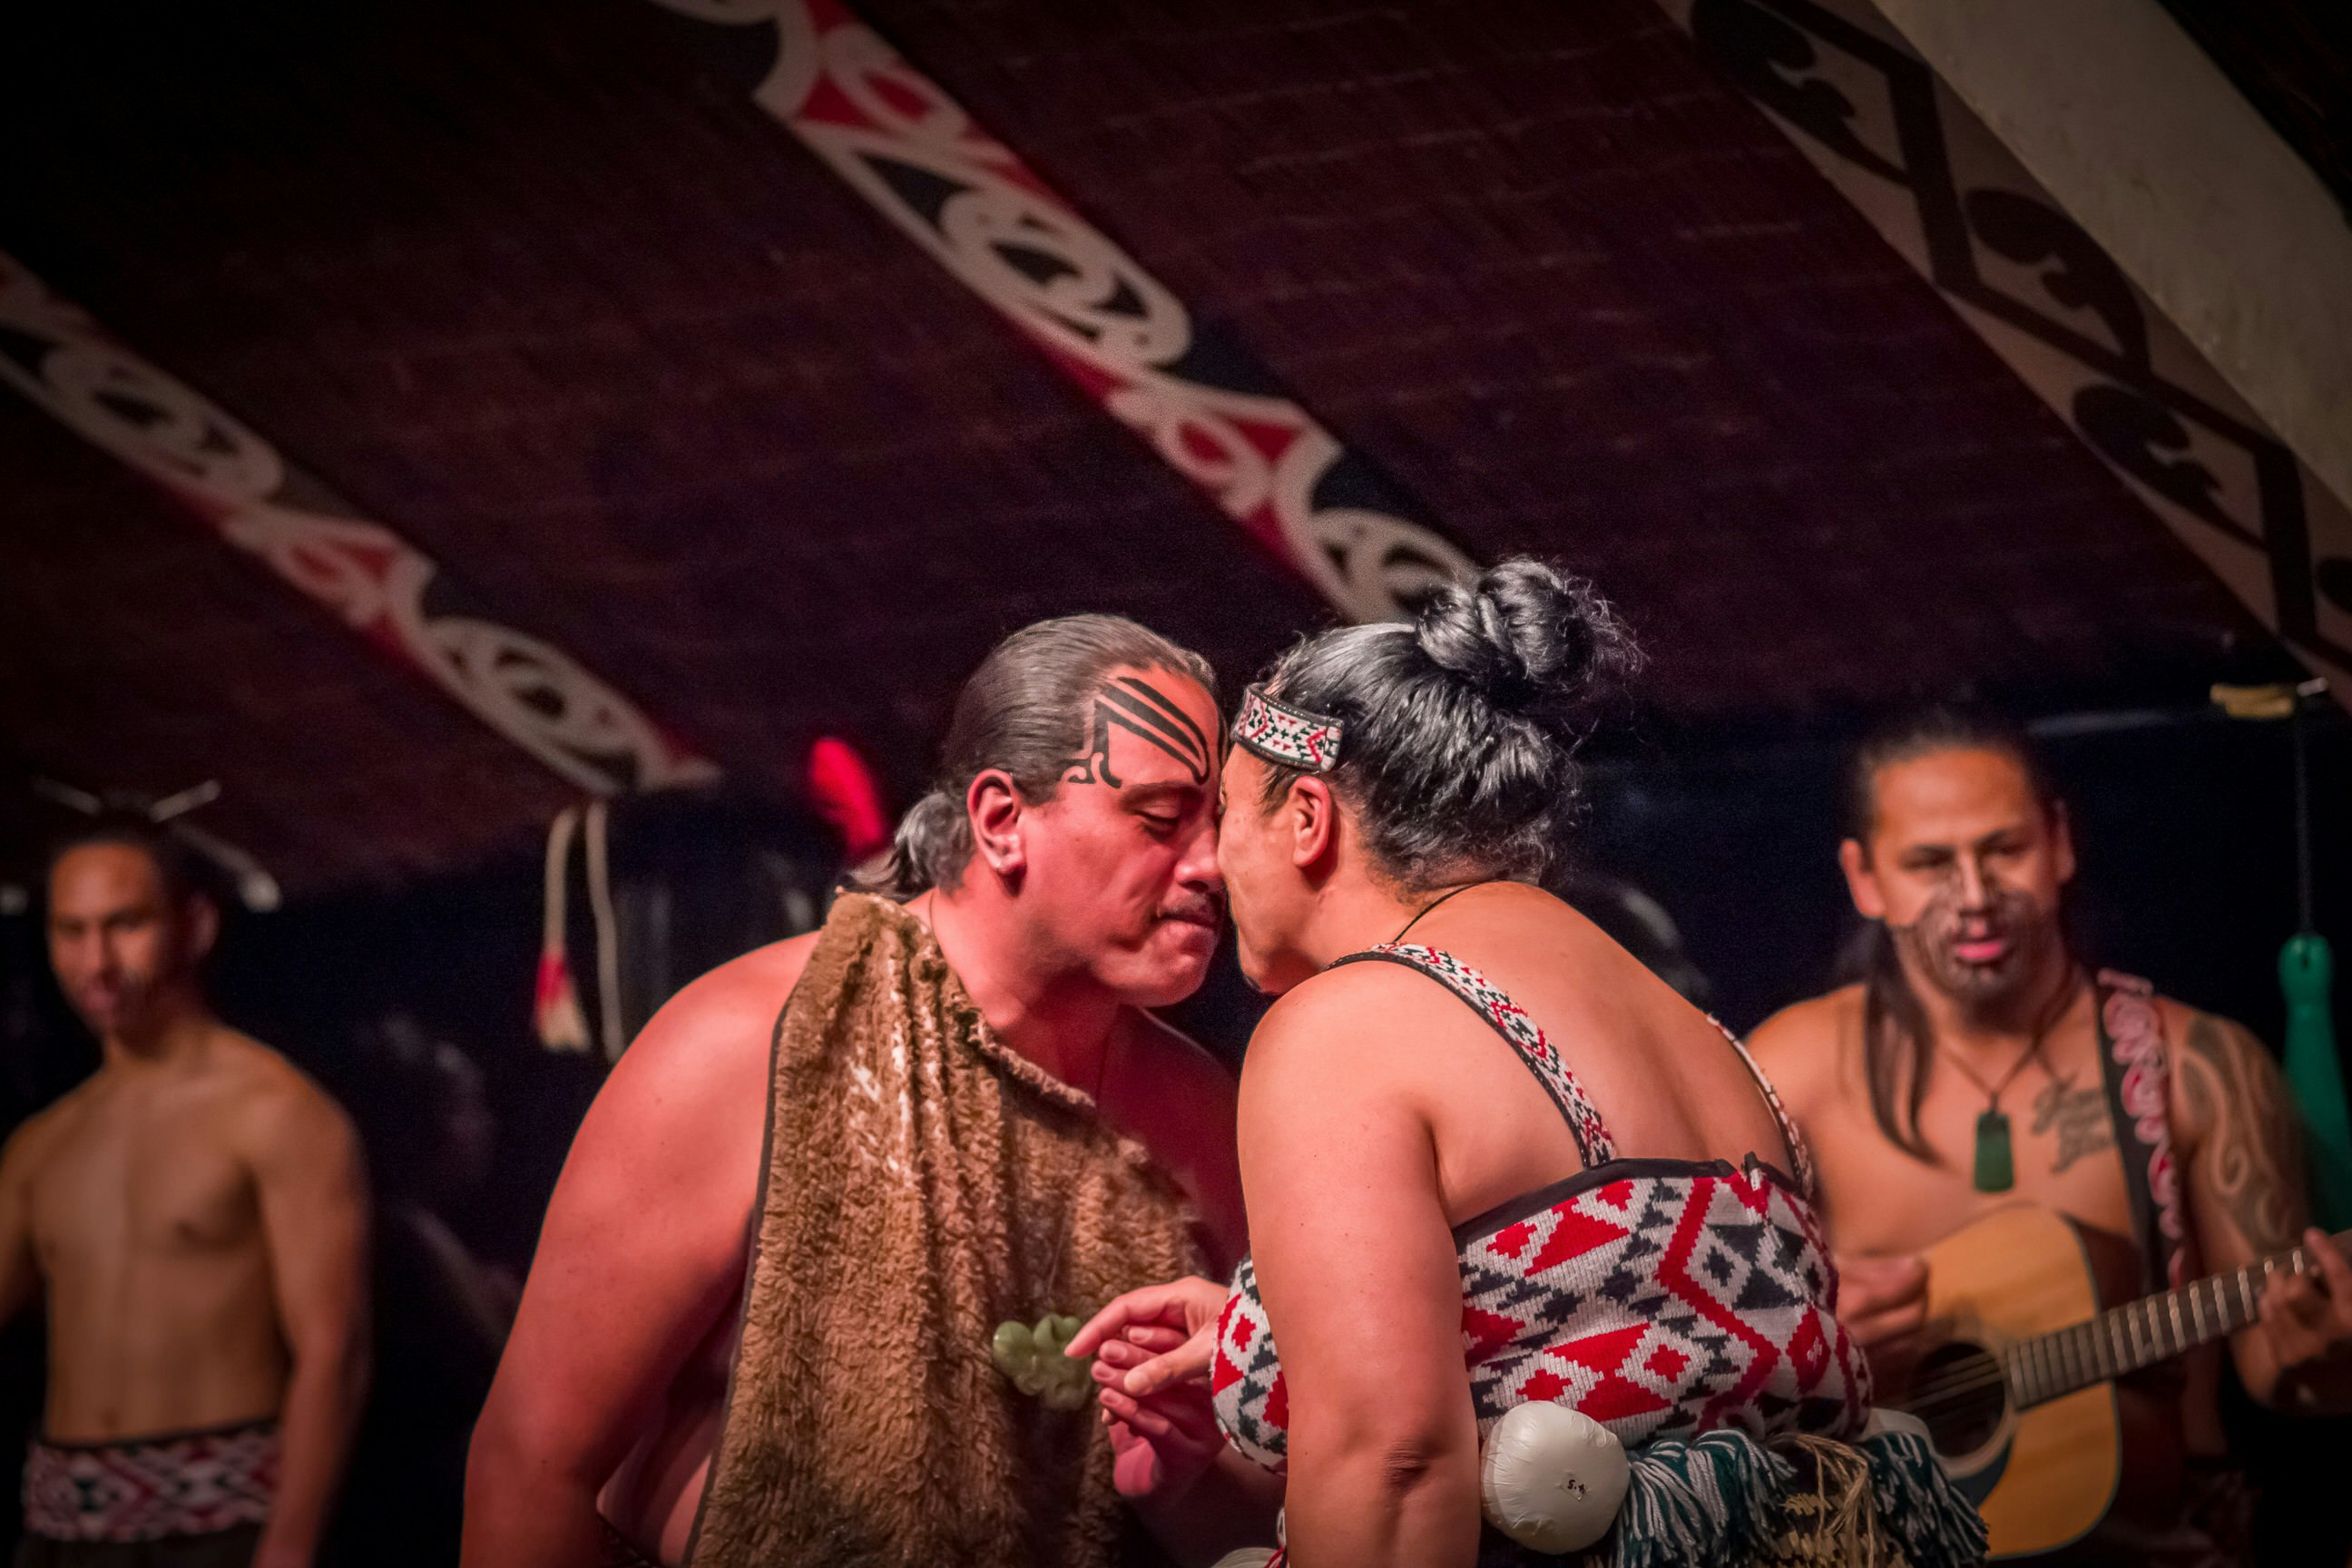 A Tamaki Māori couple is dancing. They are facing each other, holding hands and touching noses. They are wearing traditional clothing; the man has tan-coloured cloth draped over his torso, while the woman has a top with a red and grey geometric pattern. There is a Māori guitarist in the background.